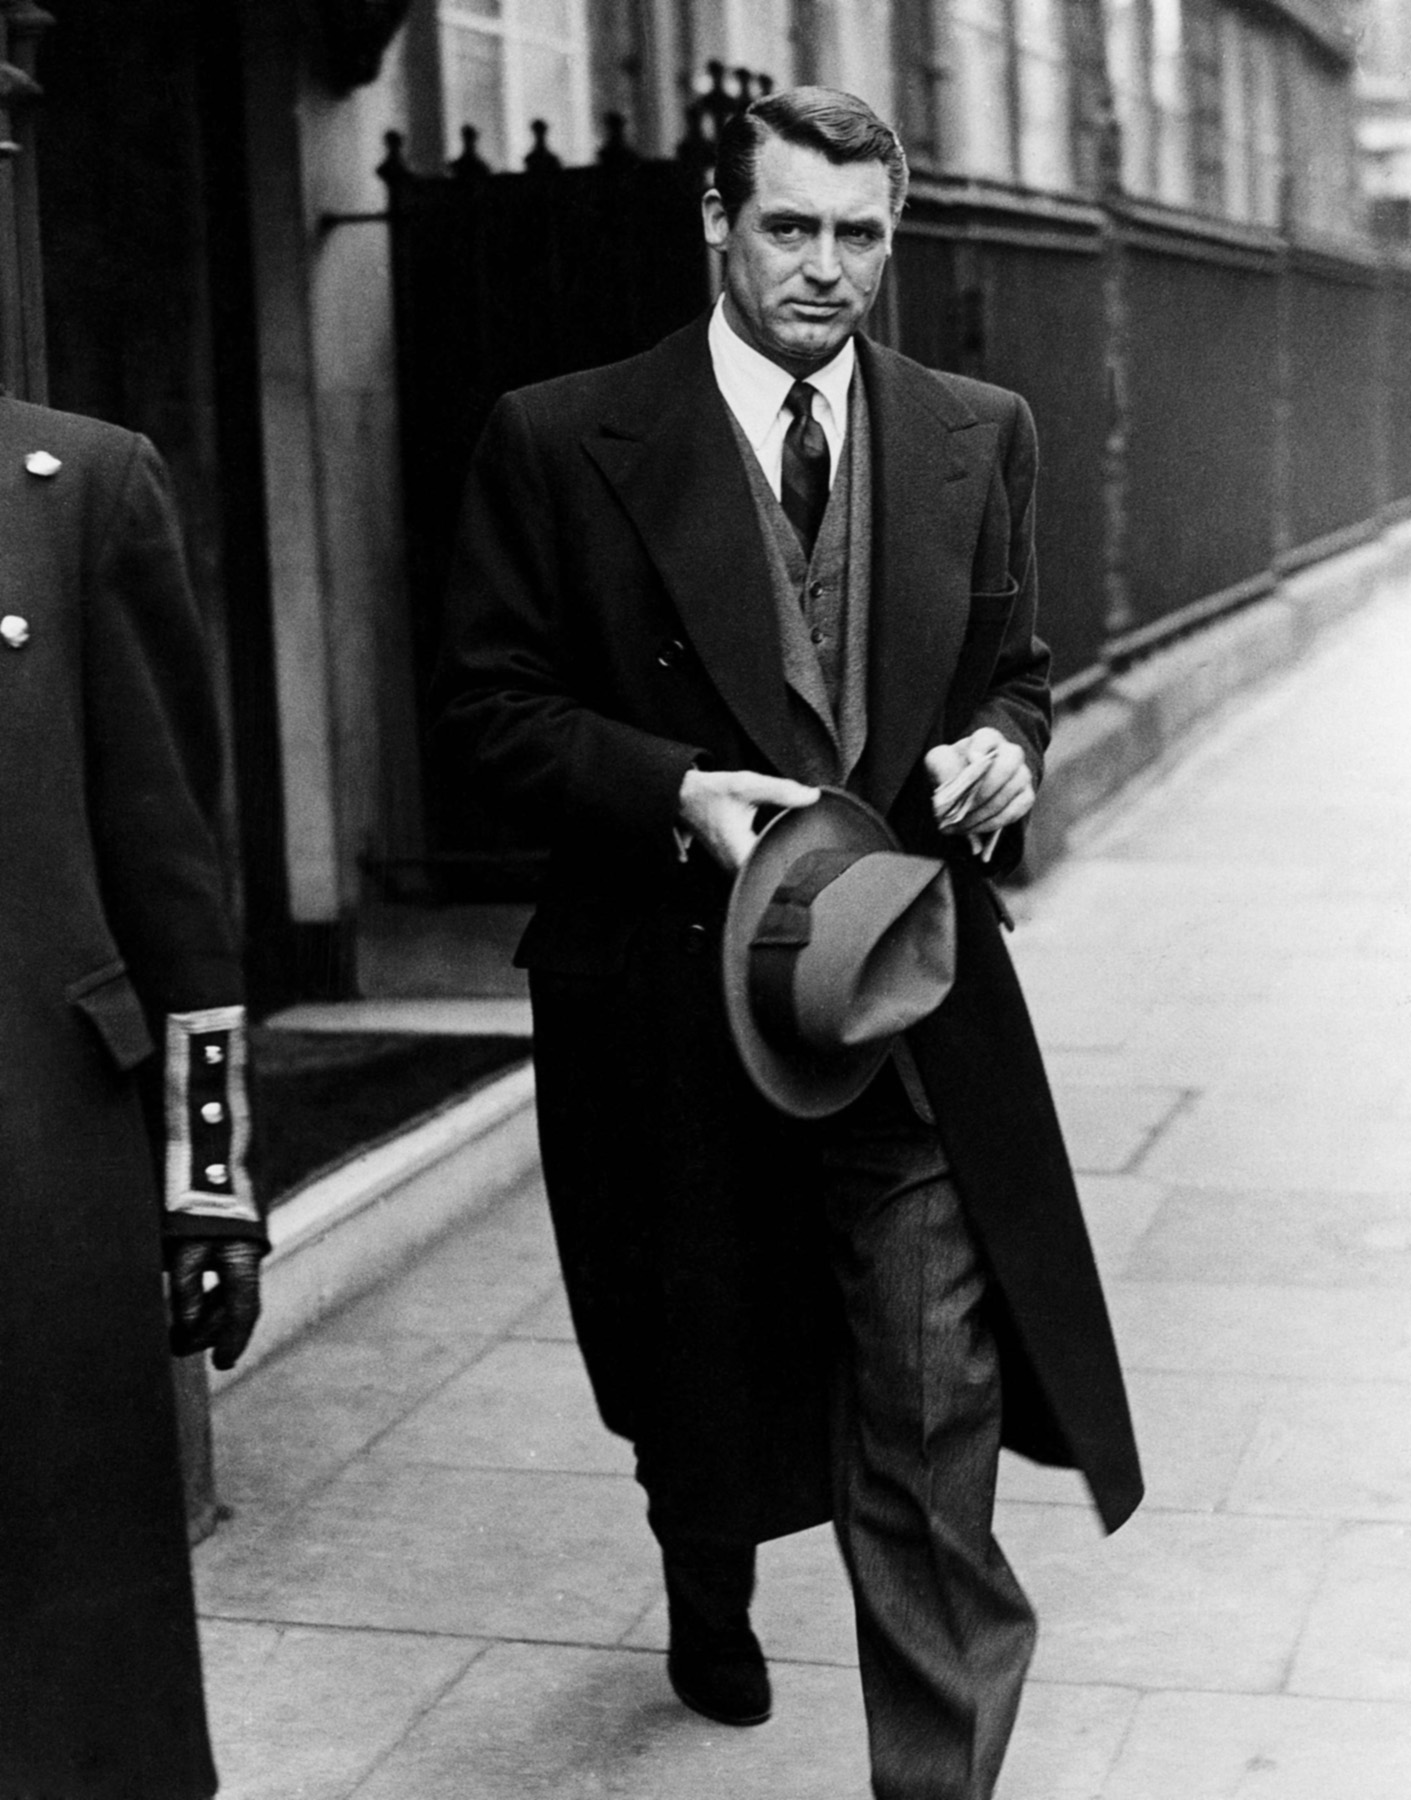 The definition of old school cool. Cary Grant in the 1950s